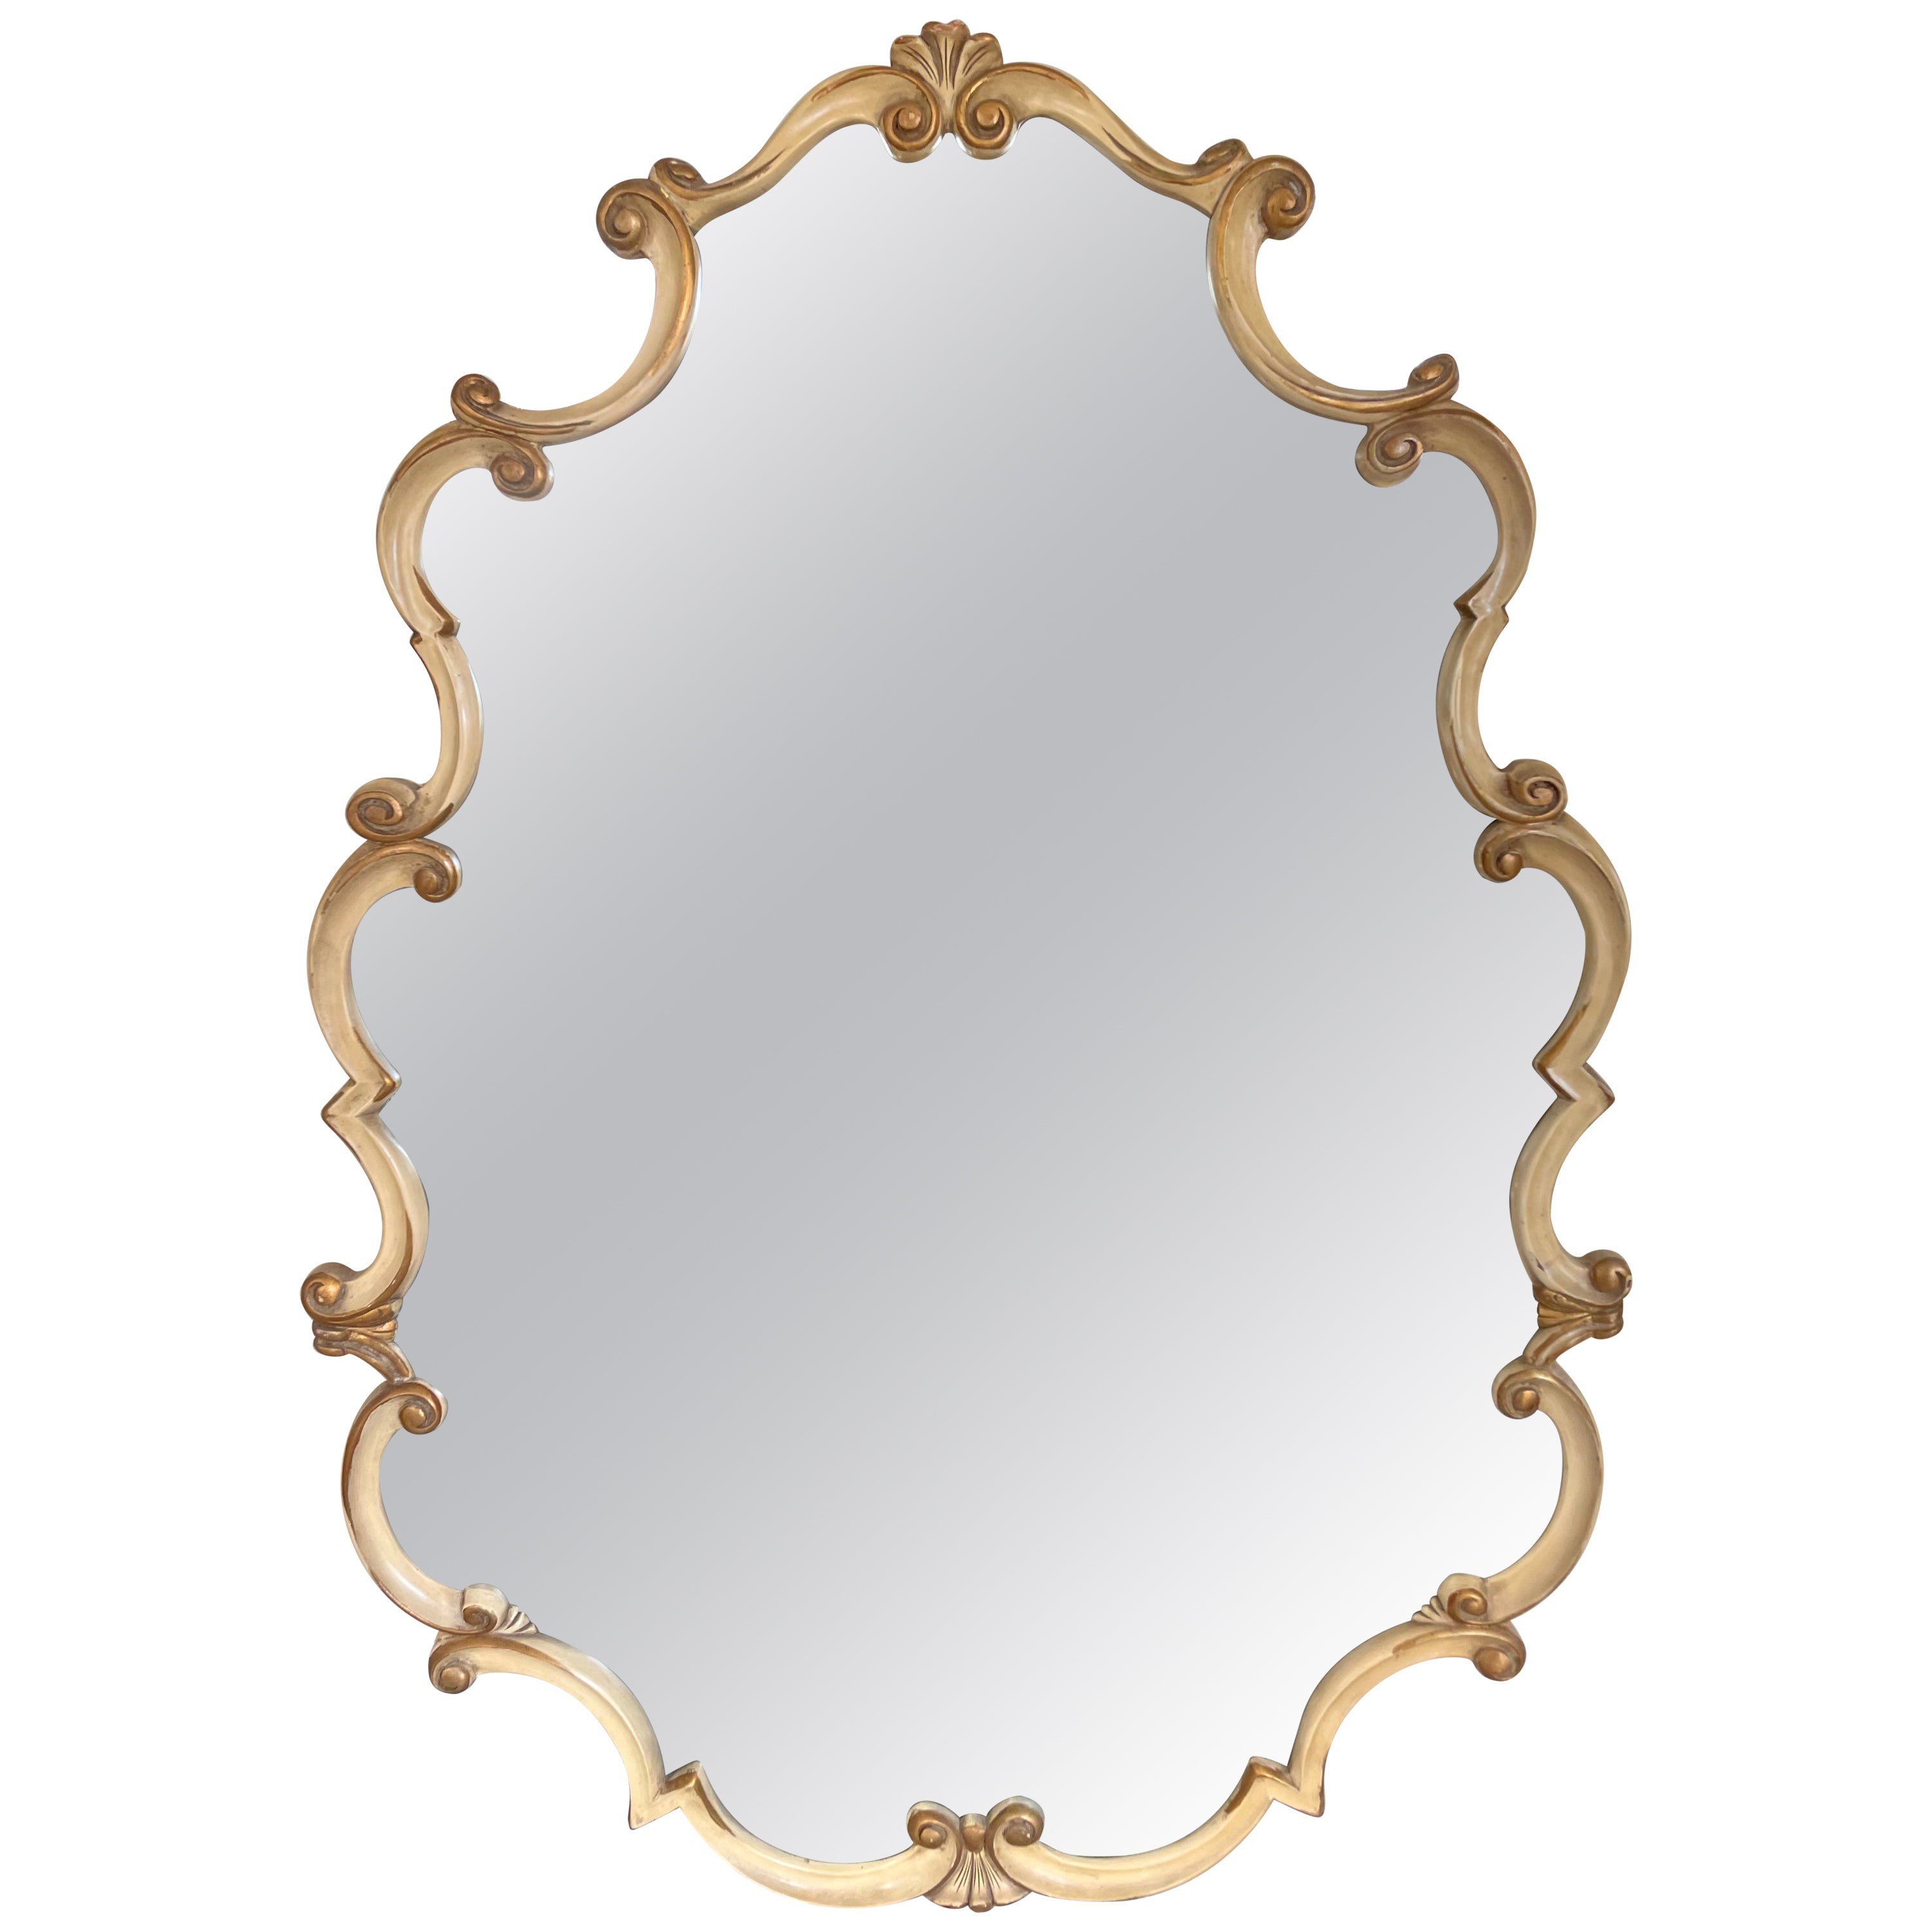 French Regency Style Wall Mirror with Scrolled Fruitwood Frame For Sale